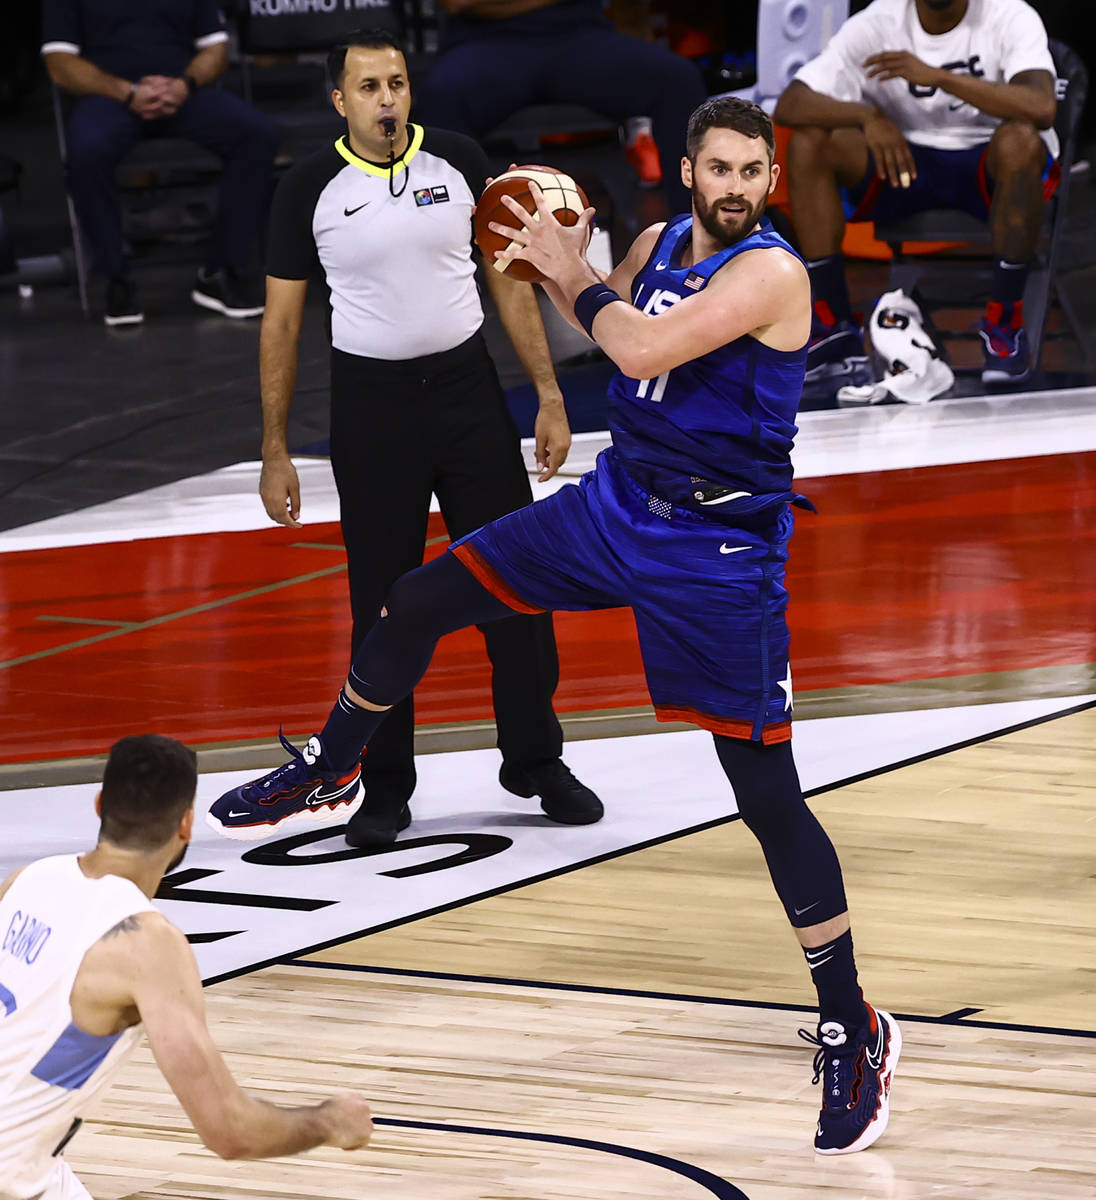 USAÕs Kevin Love (11) grabs a rebound during the second half of an exhibition basketball g ...